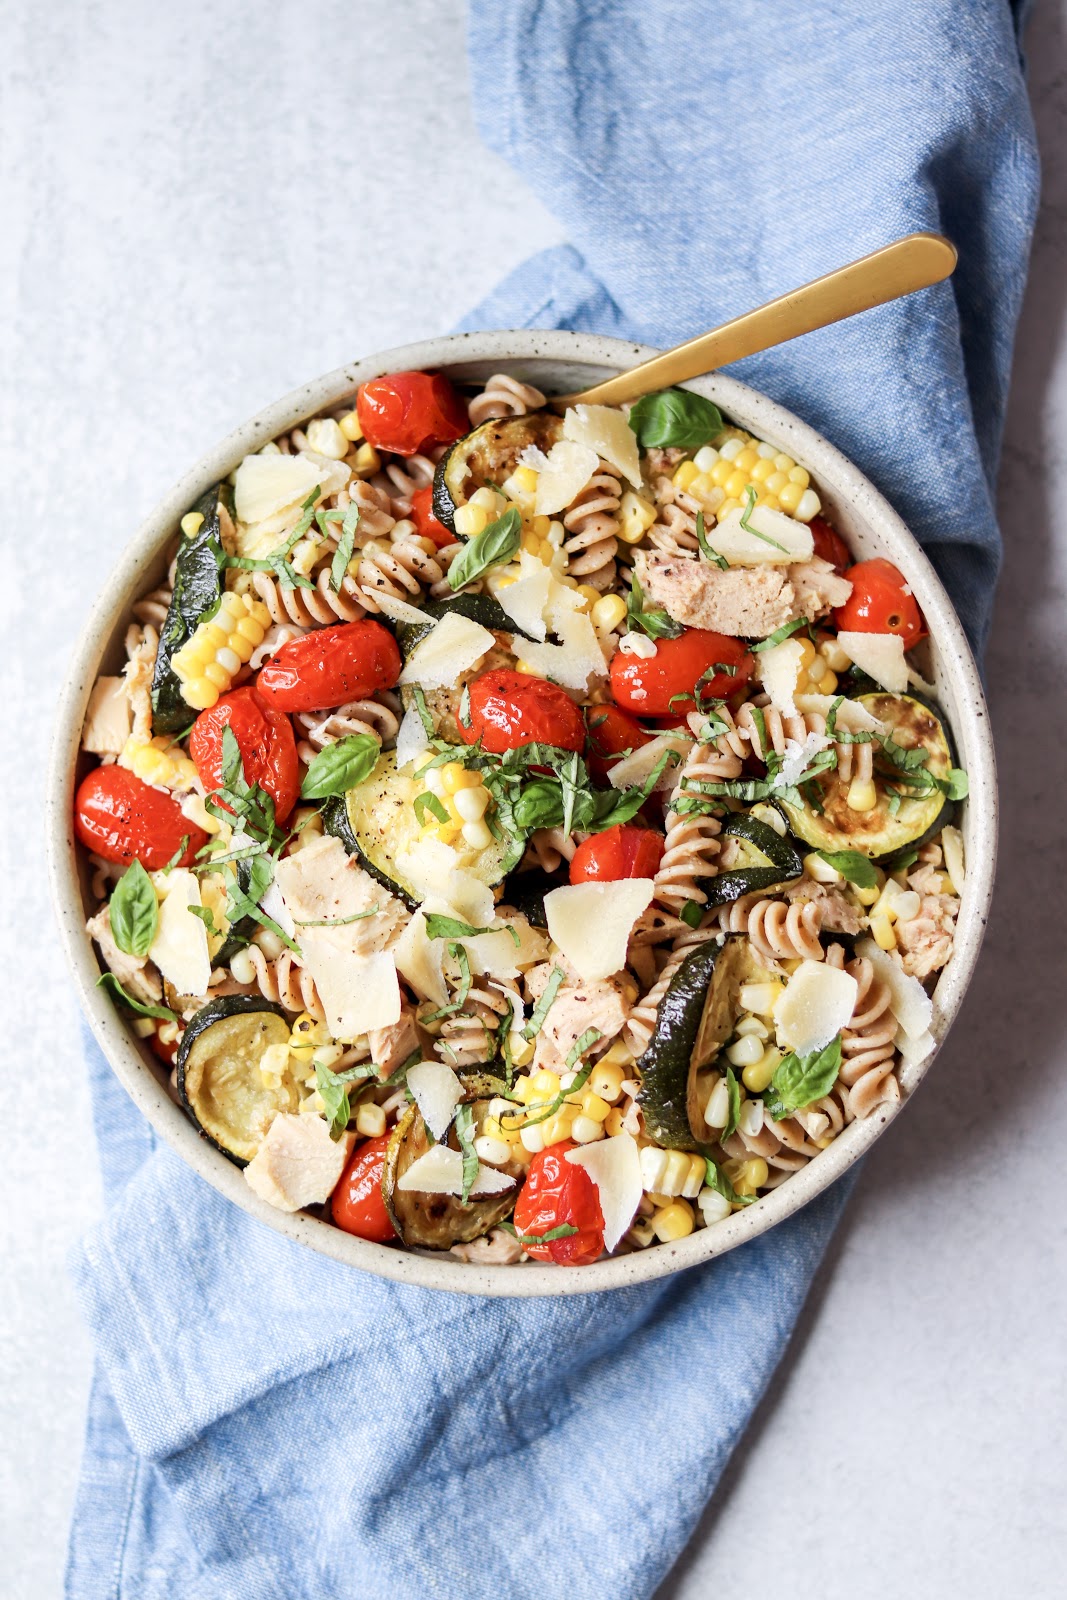 easy pasta salad with vegetables and tuna